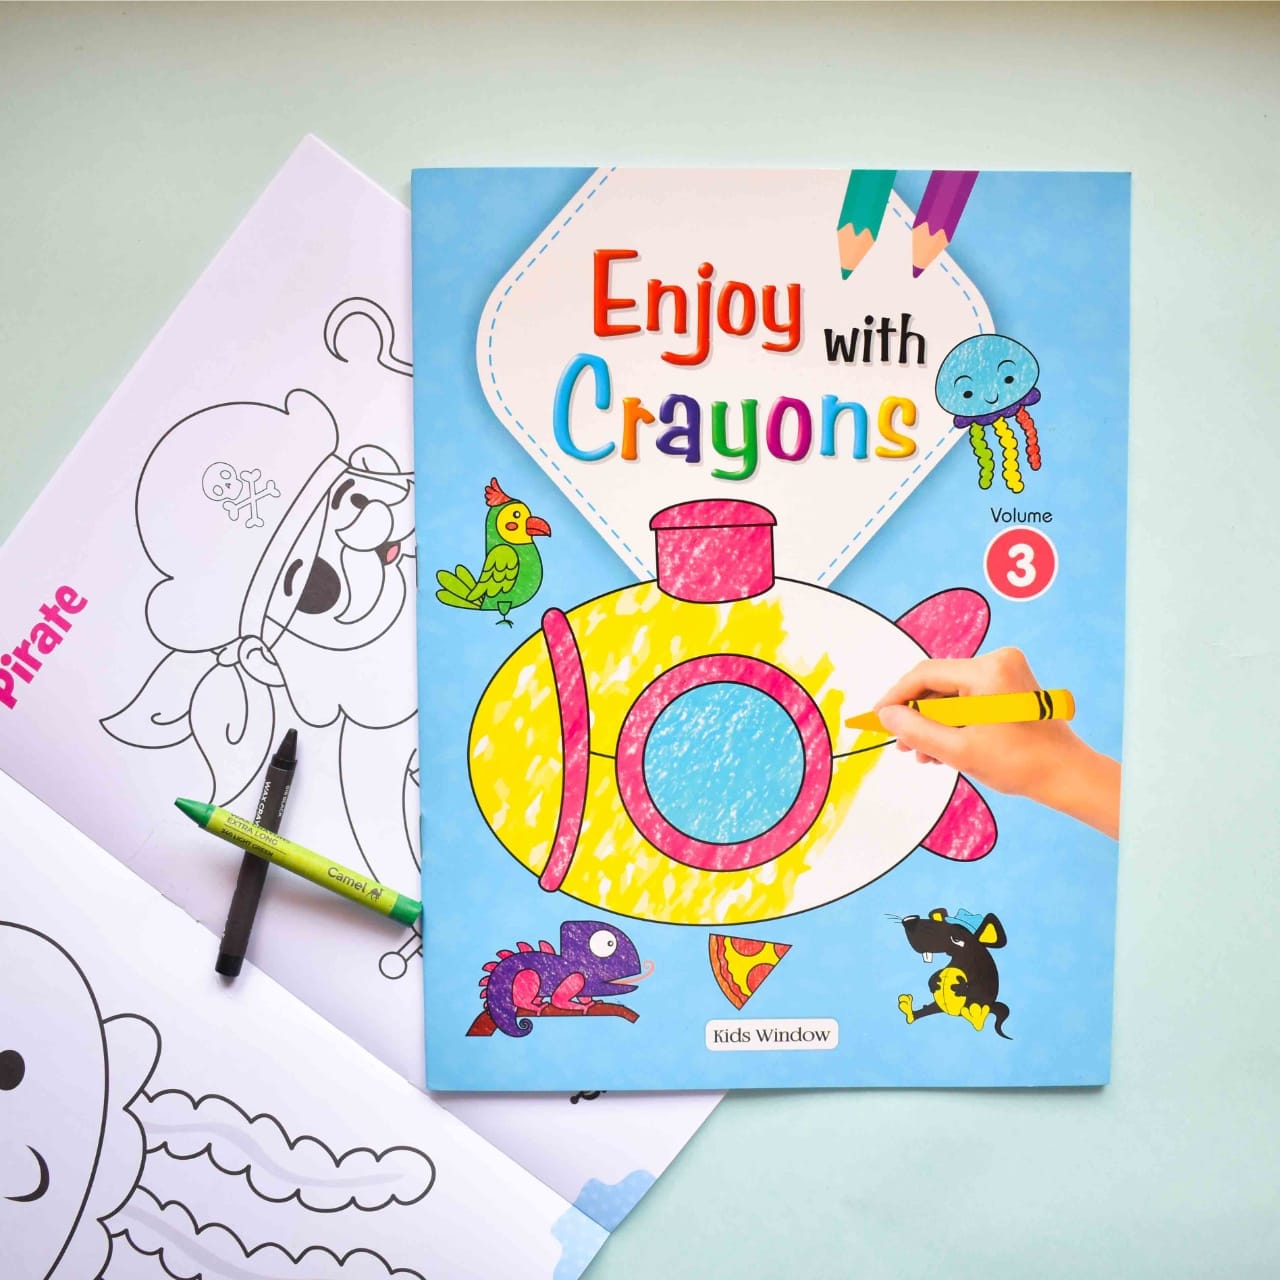 mahaveer book publication fort Educational Books & Notebooks Enjoy Creative Coloring Fun with Crayon's Easy Full-Page Picture Coloring Book